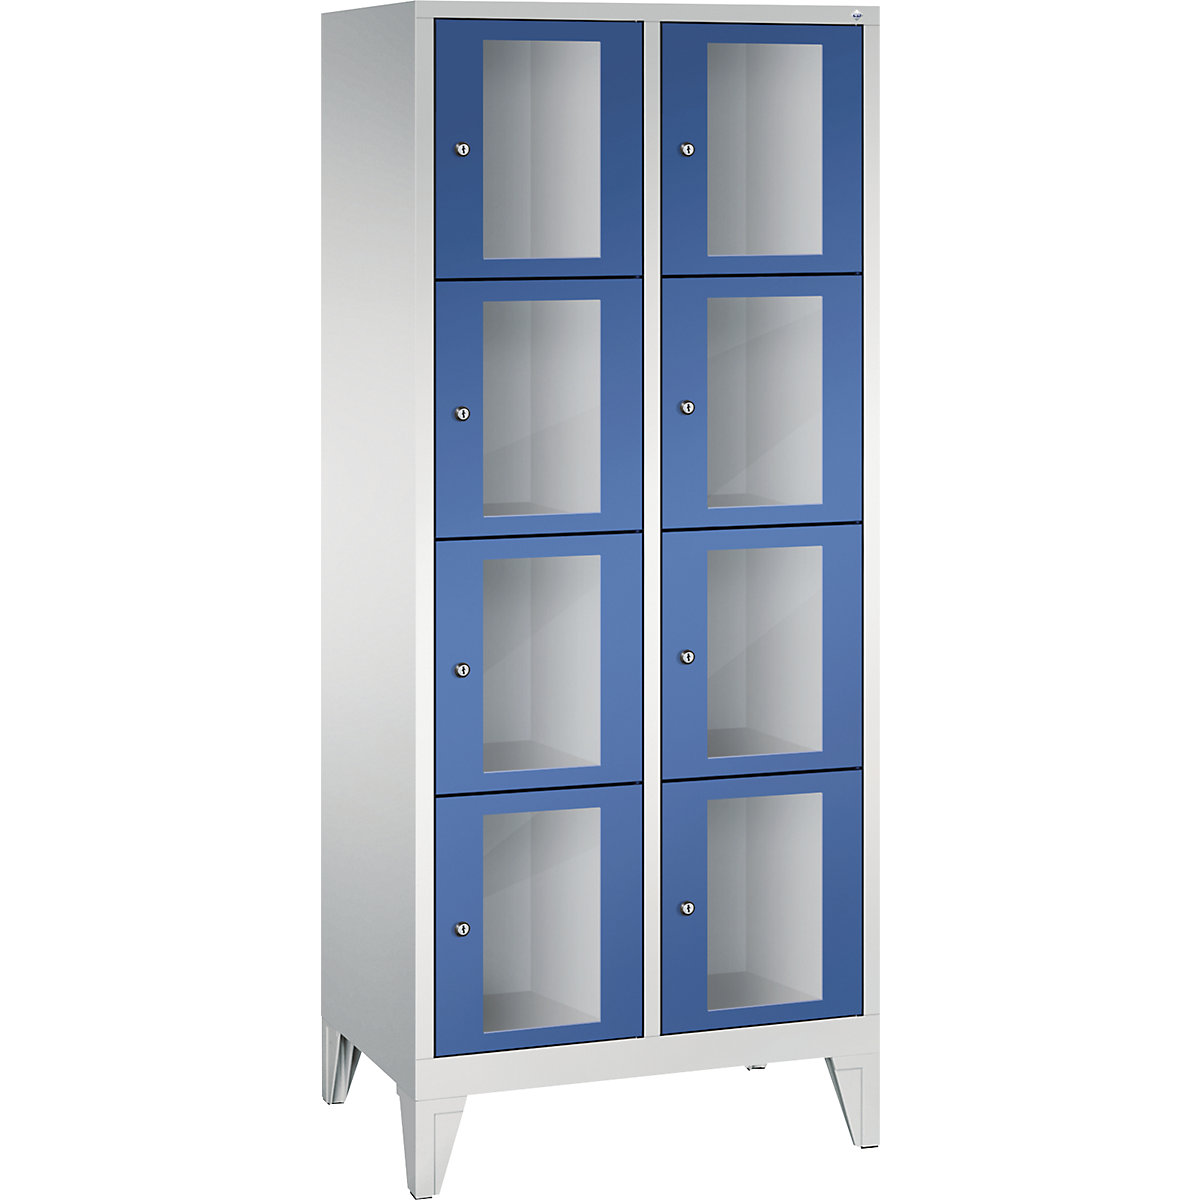 CLASSIC locker unit, compartment height 375 mm, with feet – C+P, 8 compartments, width 810 mm, gentian blue door-4